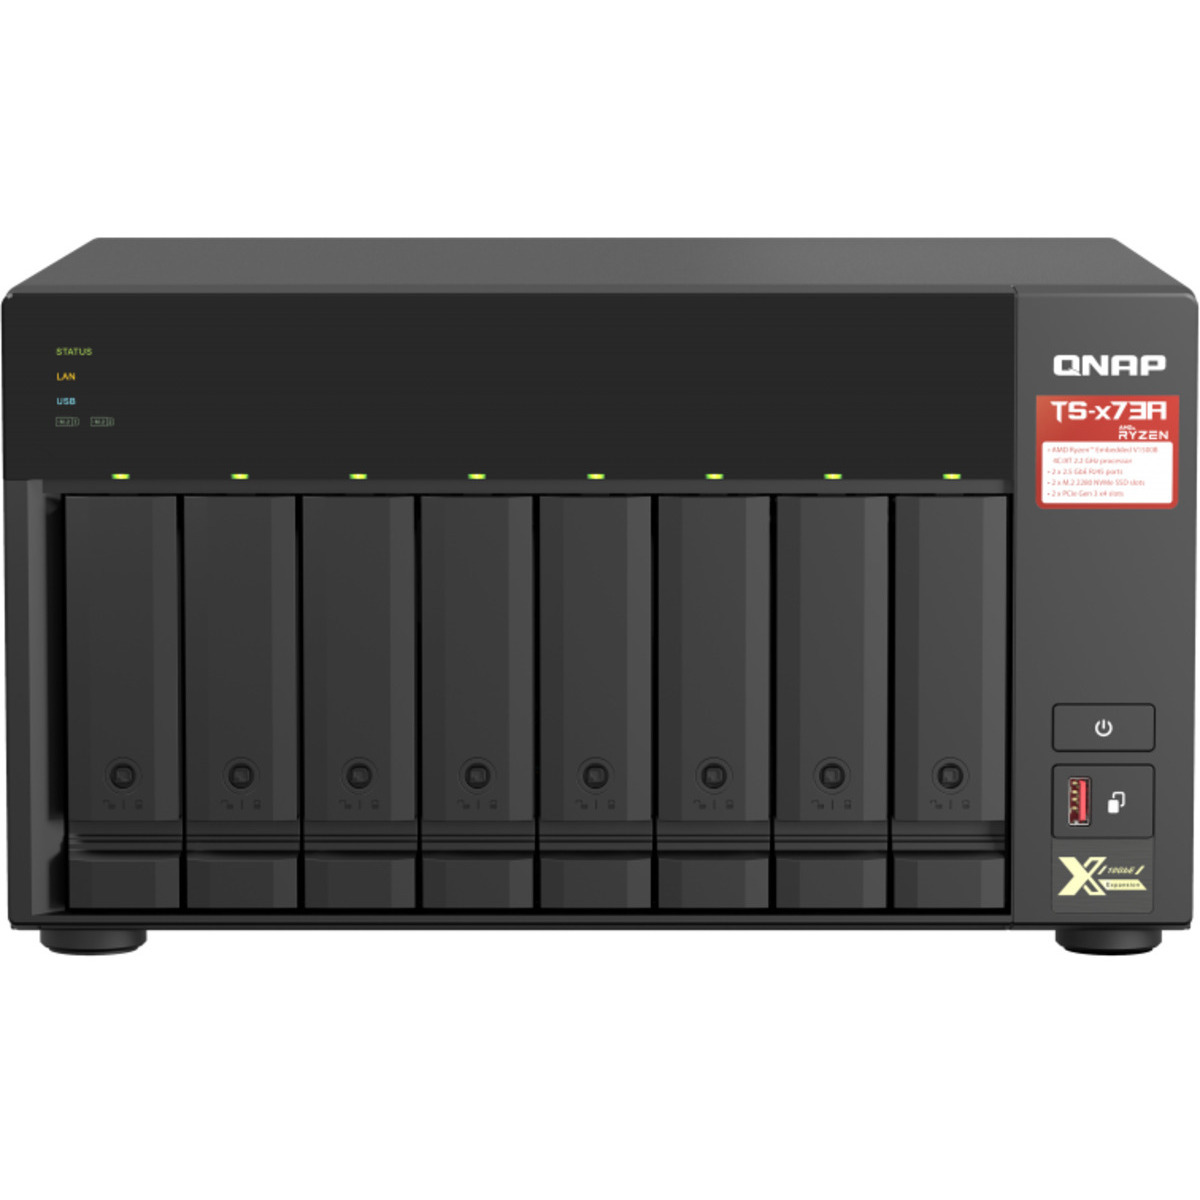 QNAP TS-873A 36tb 8-Bay Desktop Multimedia / Power User / Business NAS - Network Attached Storage Device 6x6tb Seagate EXOS 7E10 ST6000NM019B 3.5 7200rpm SATA 6Gb/s HDD ENTERPRISE Class Drives Installed - Burn-In Tested TS-873A